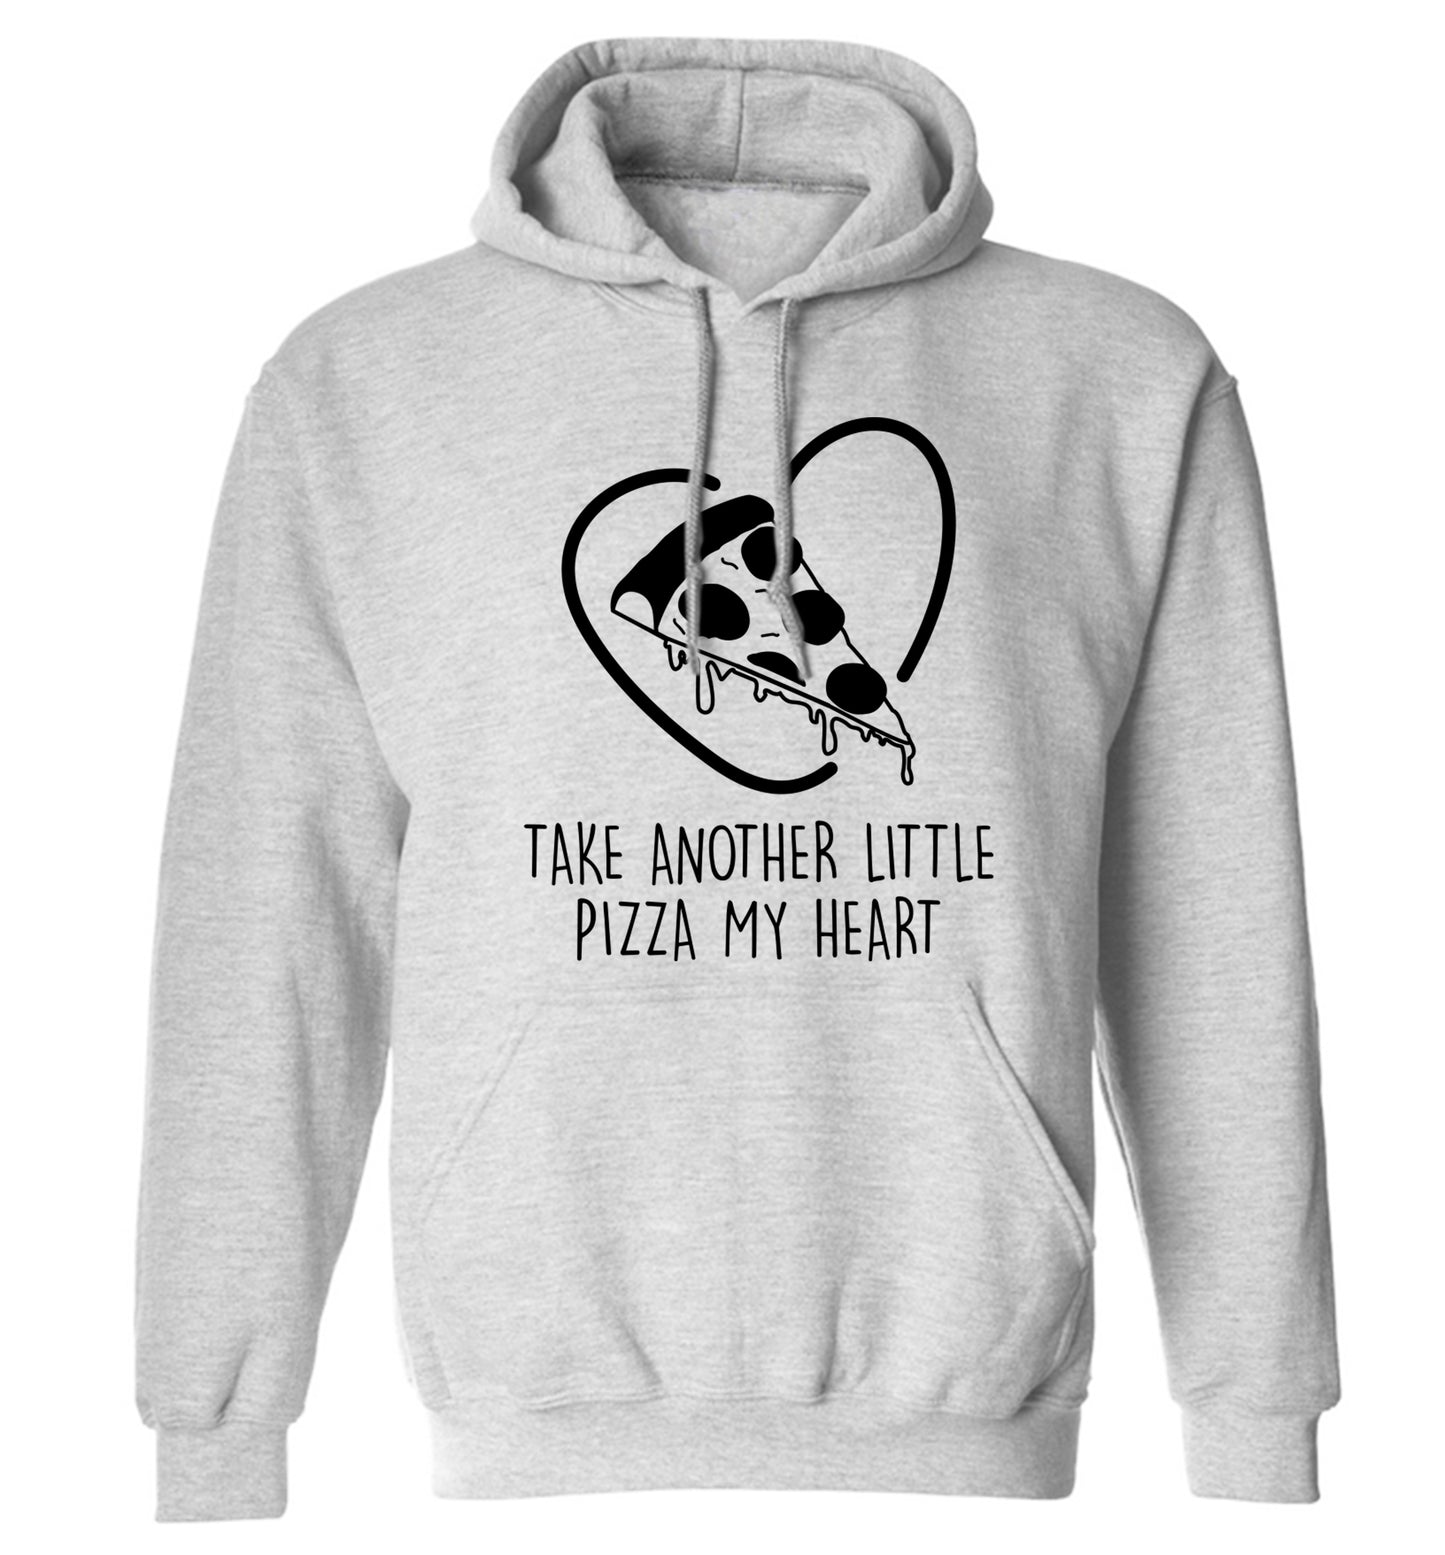 Take another little pizza my heart adults unisex grey hoodie 2XL